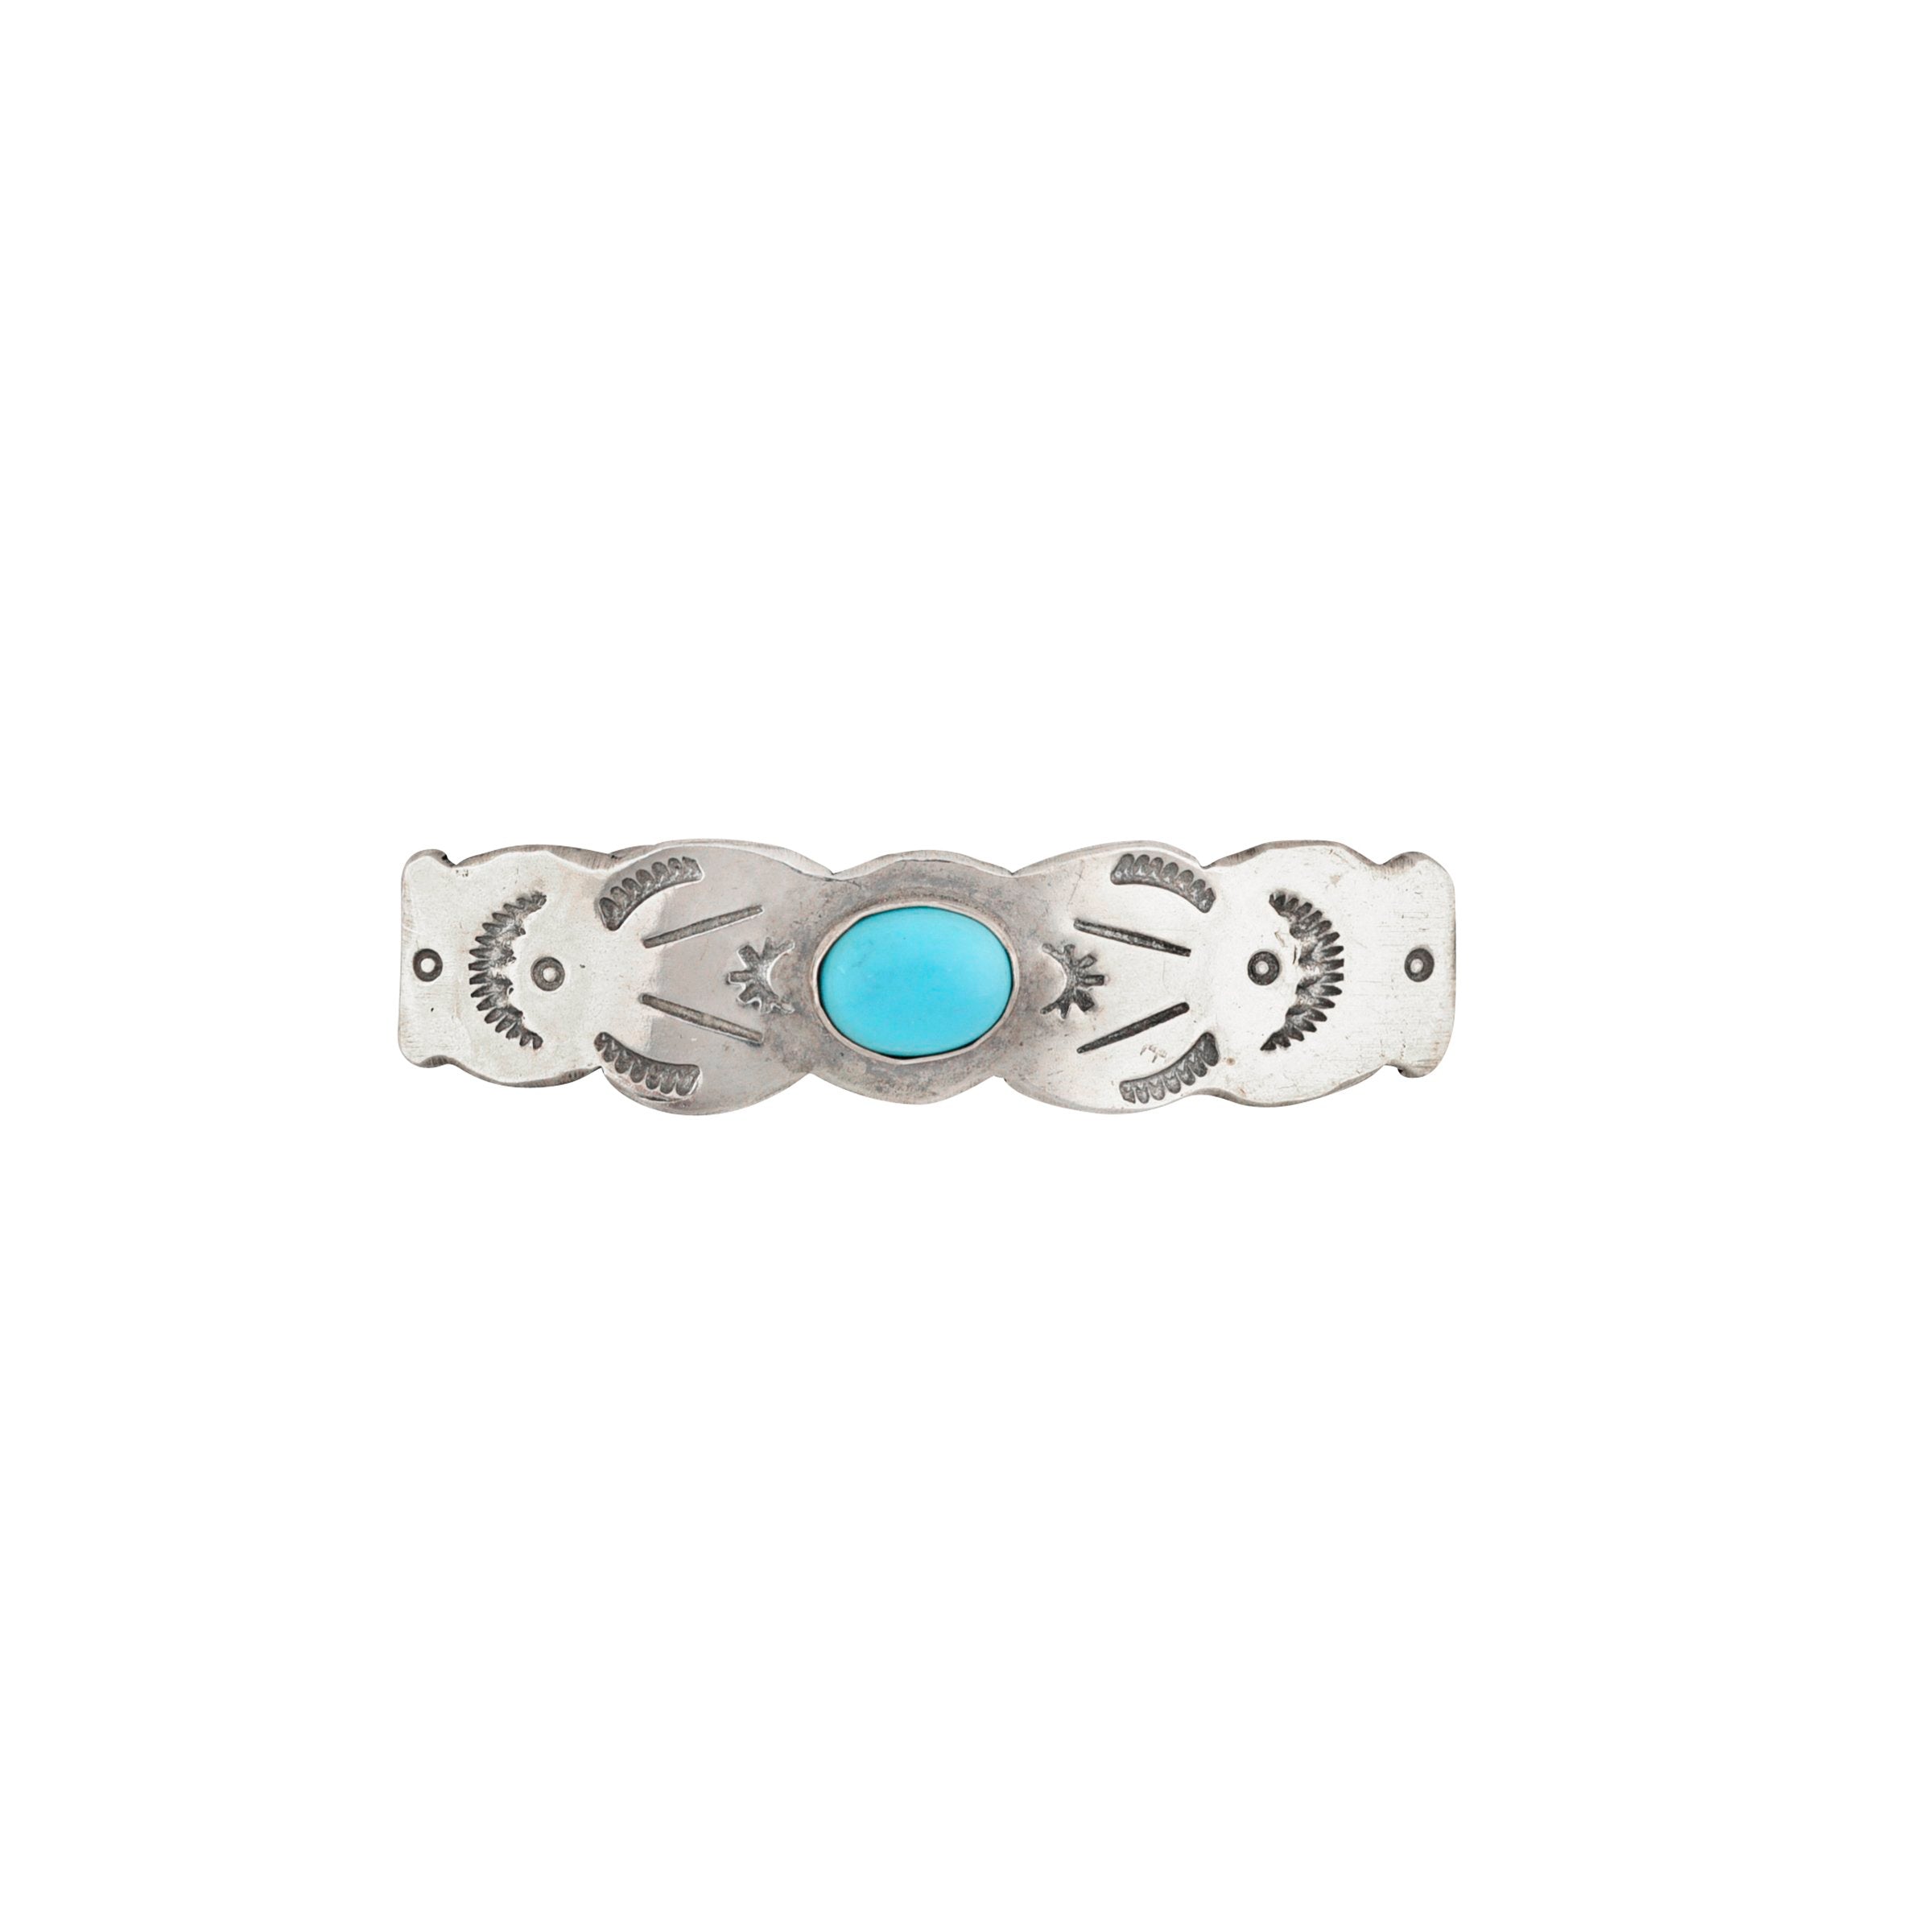 Joe Eby Silver and Turquoise Barrette